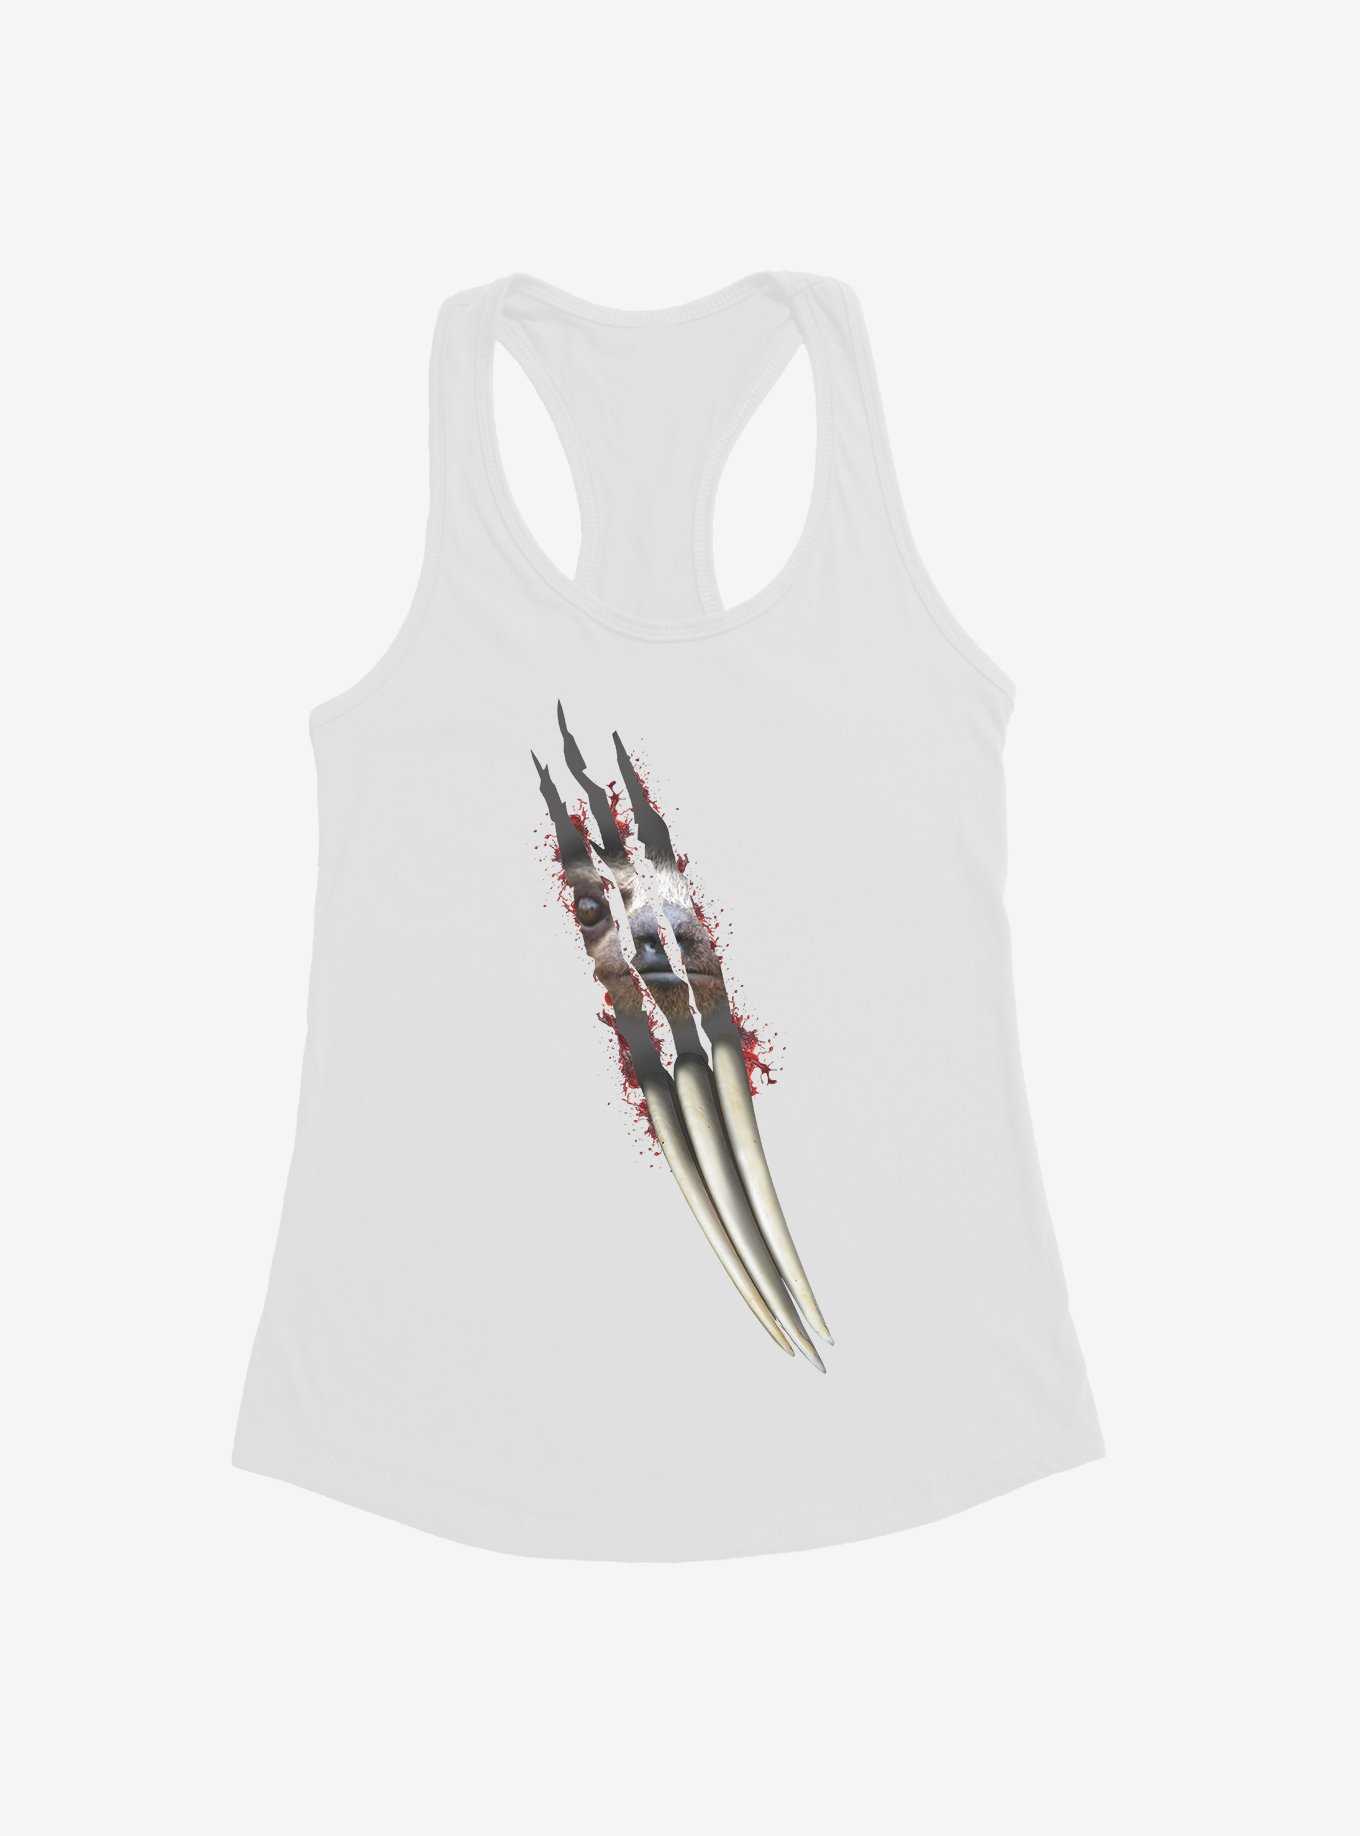 Hot Topic Scary Sloth Claws Girls Tank, , hi-res